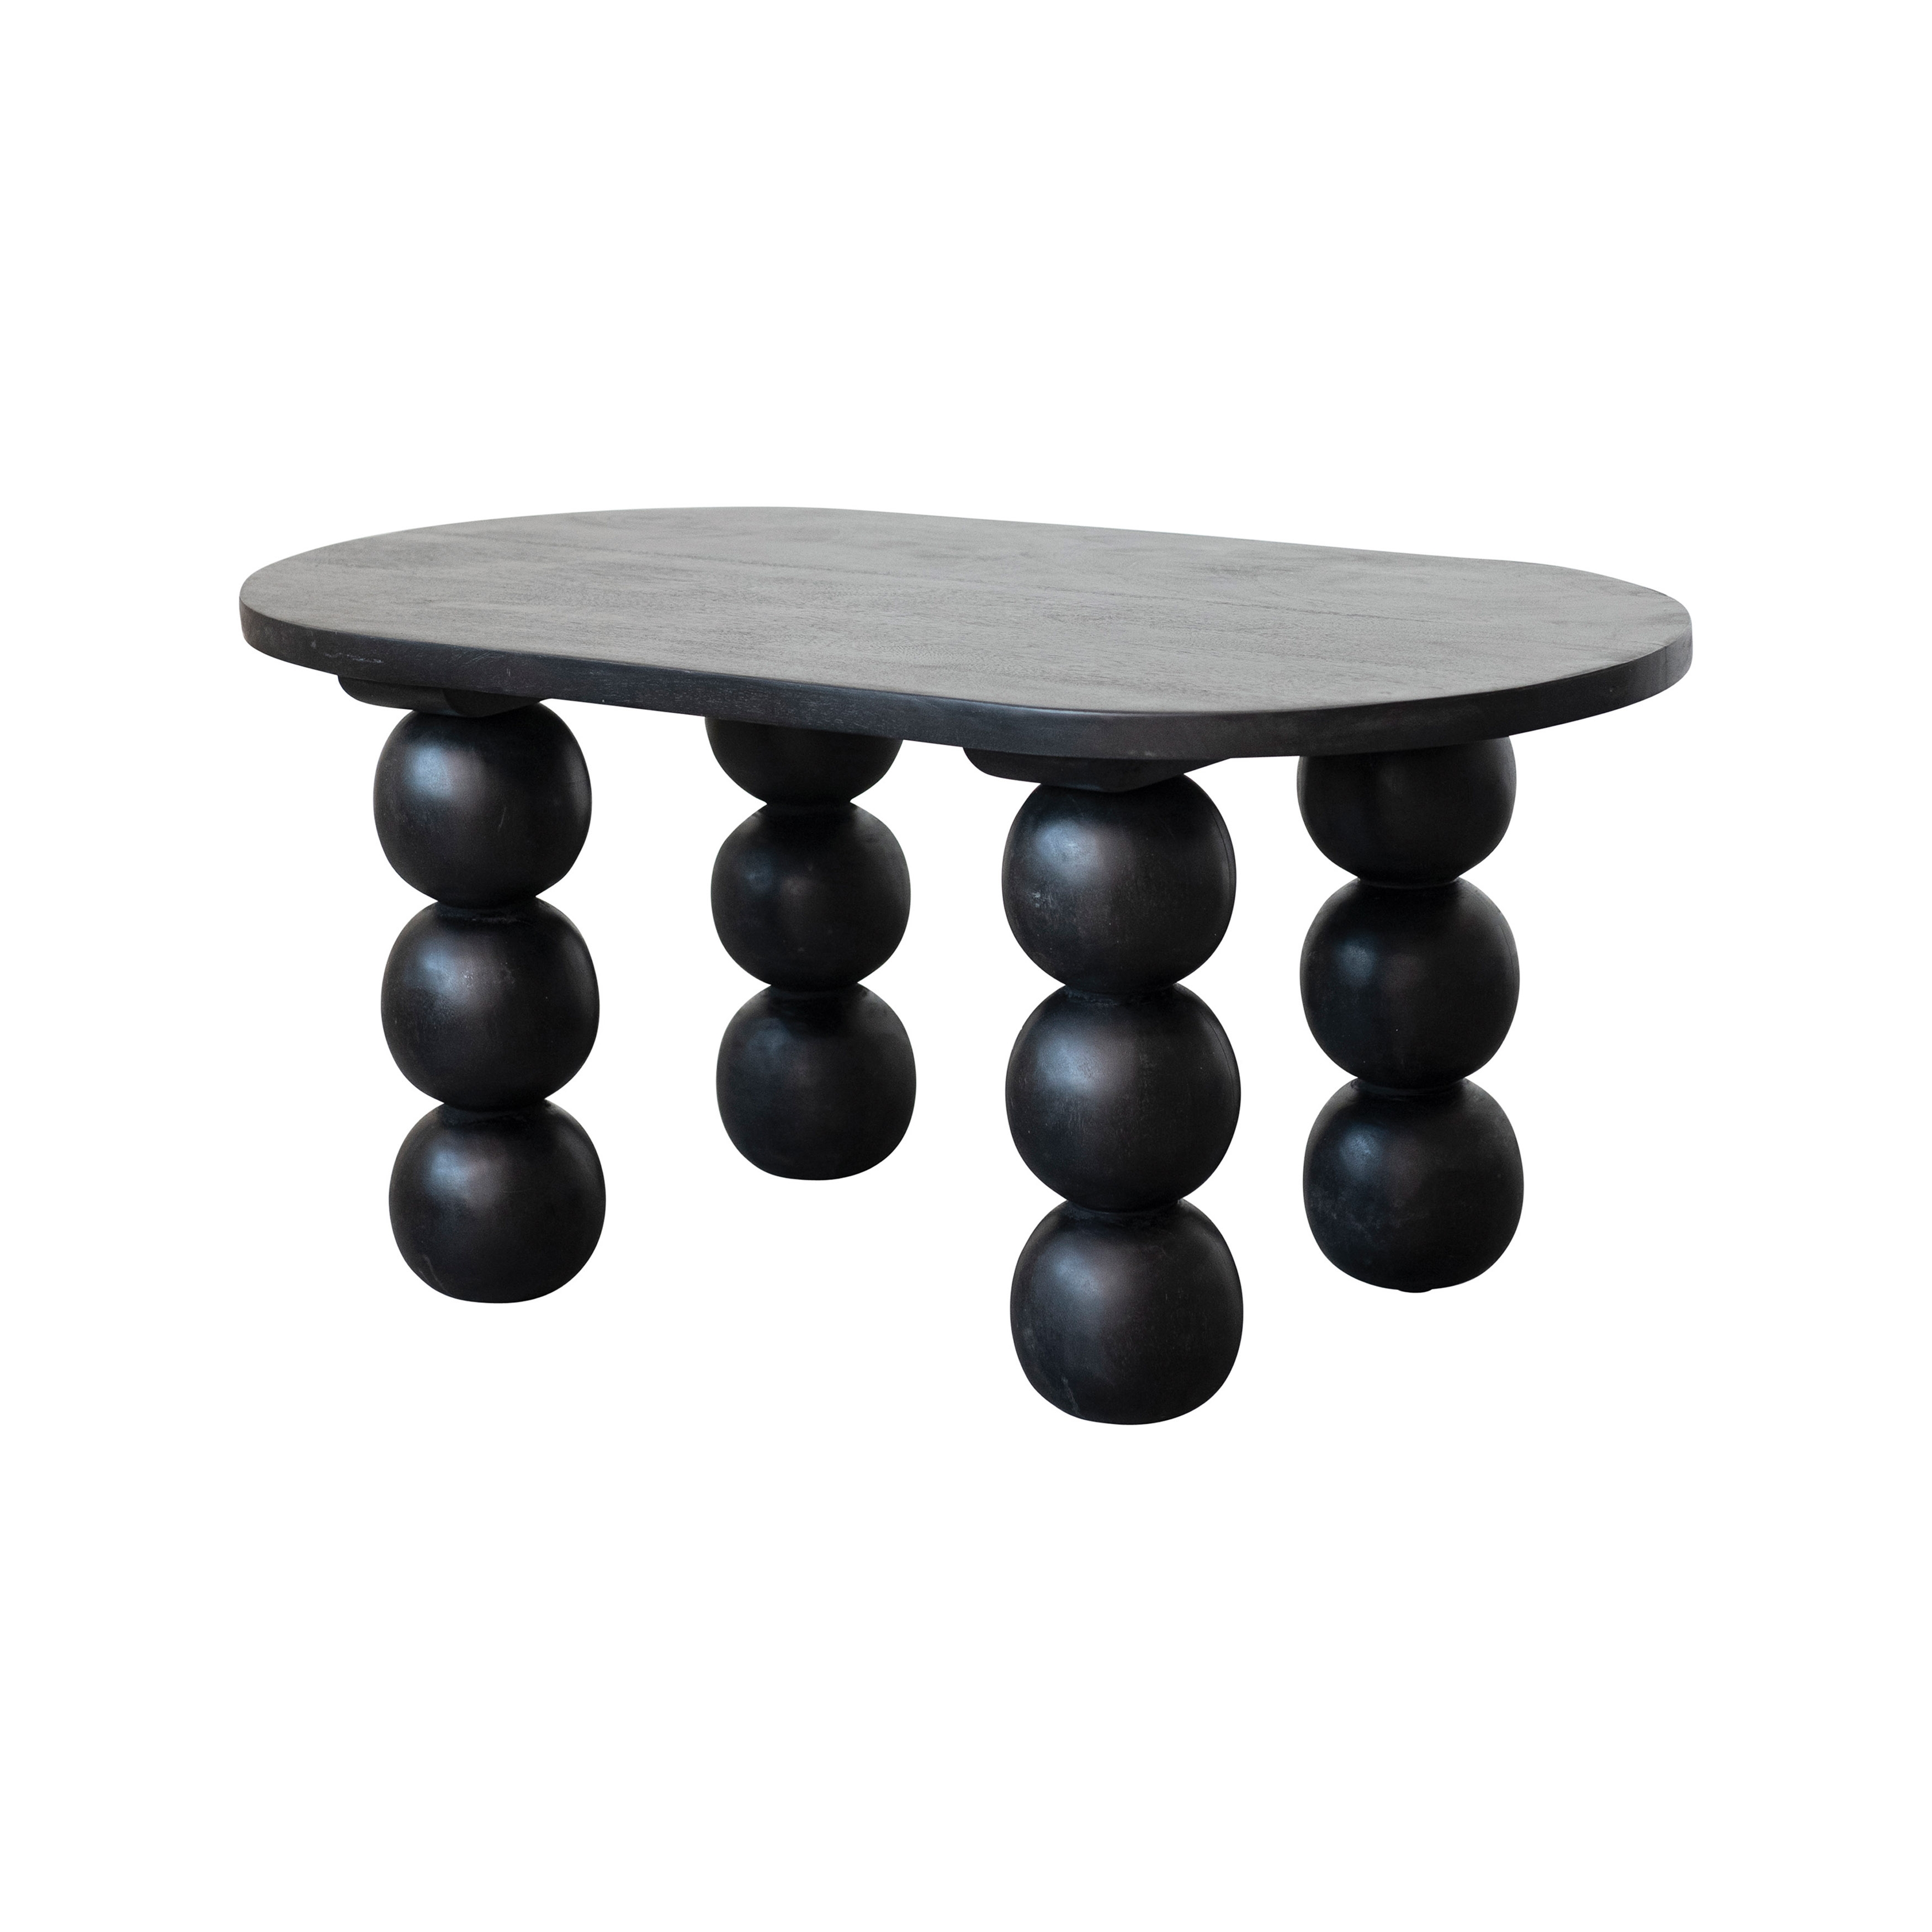 Mango Wood Coffee Table with Orb Legs and Black Finish, Black - Image 0